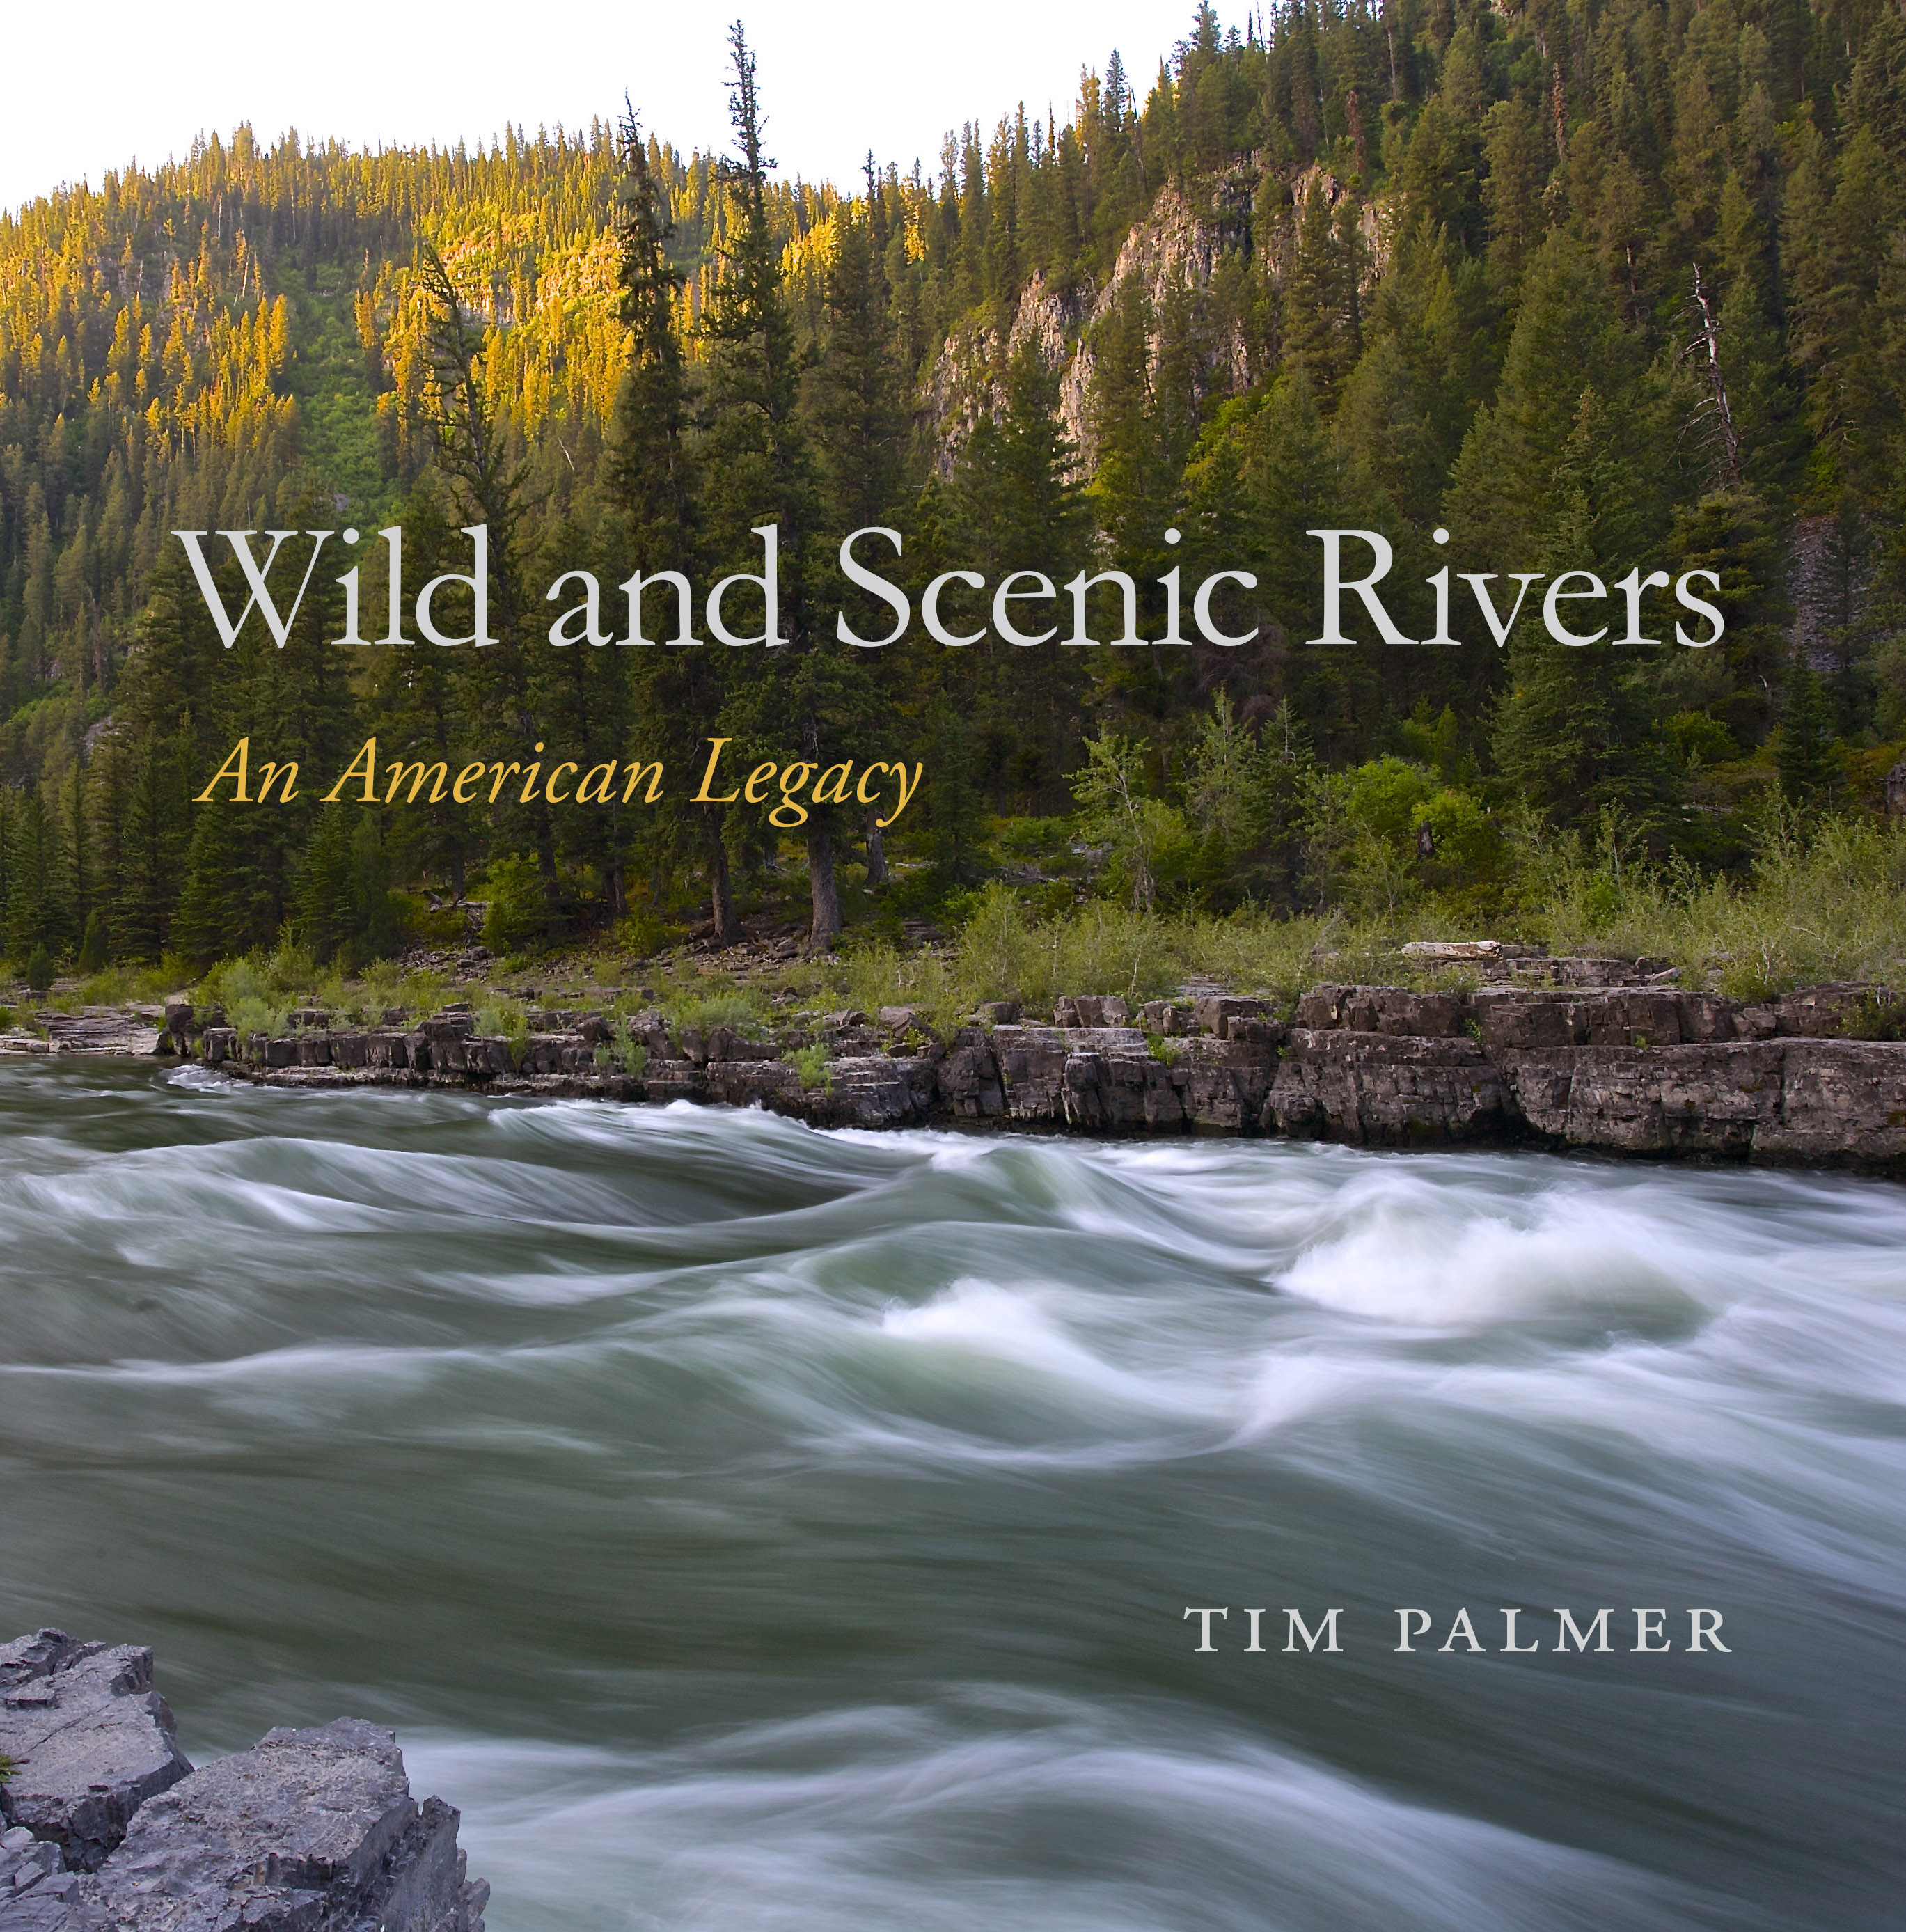 Wild and Scenic Rivers by Tim Palmer